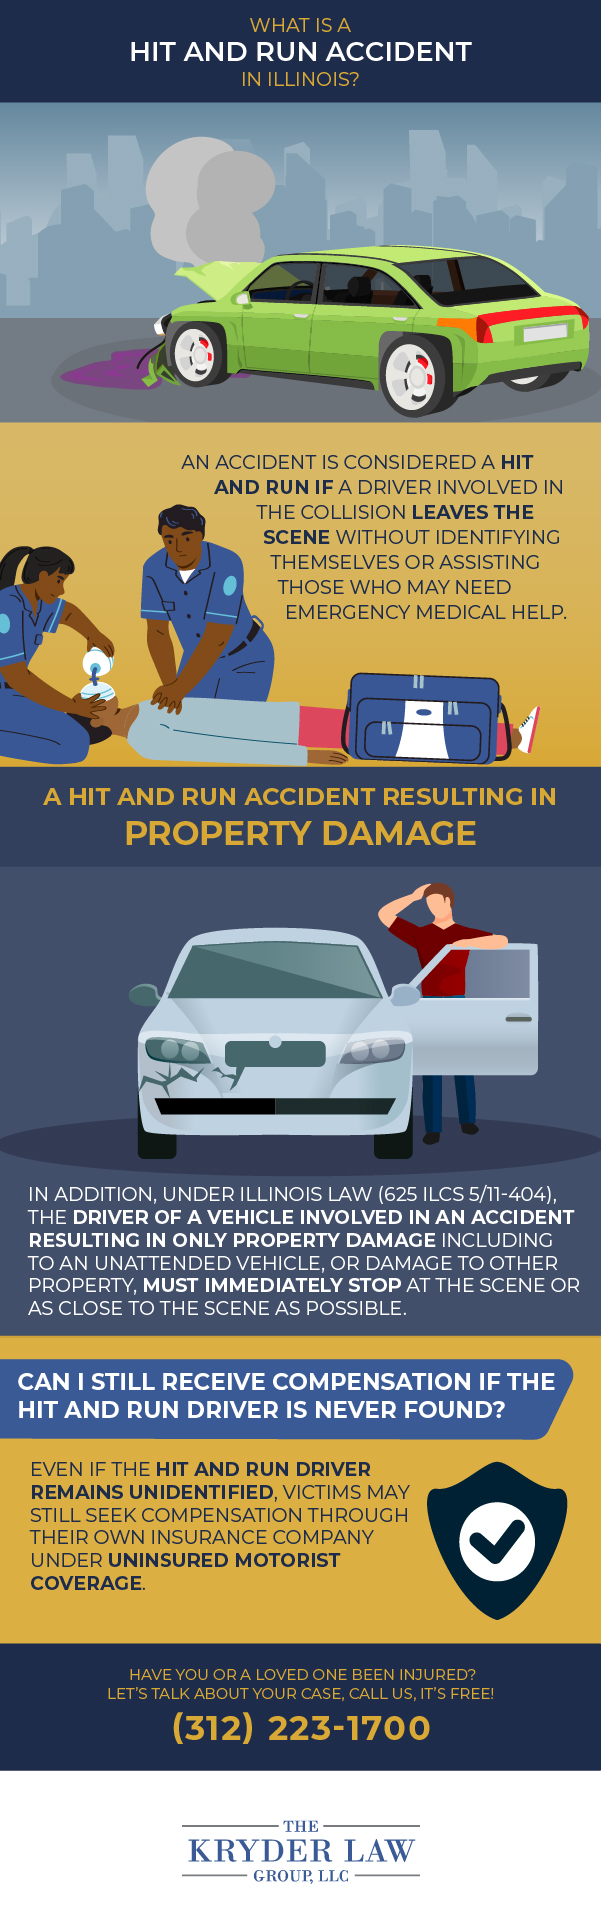 What Is a Hit and Run Accident in Illinois?